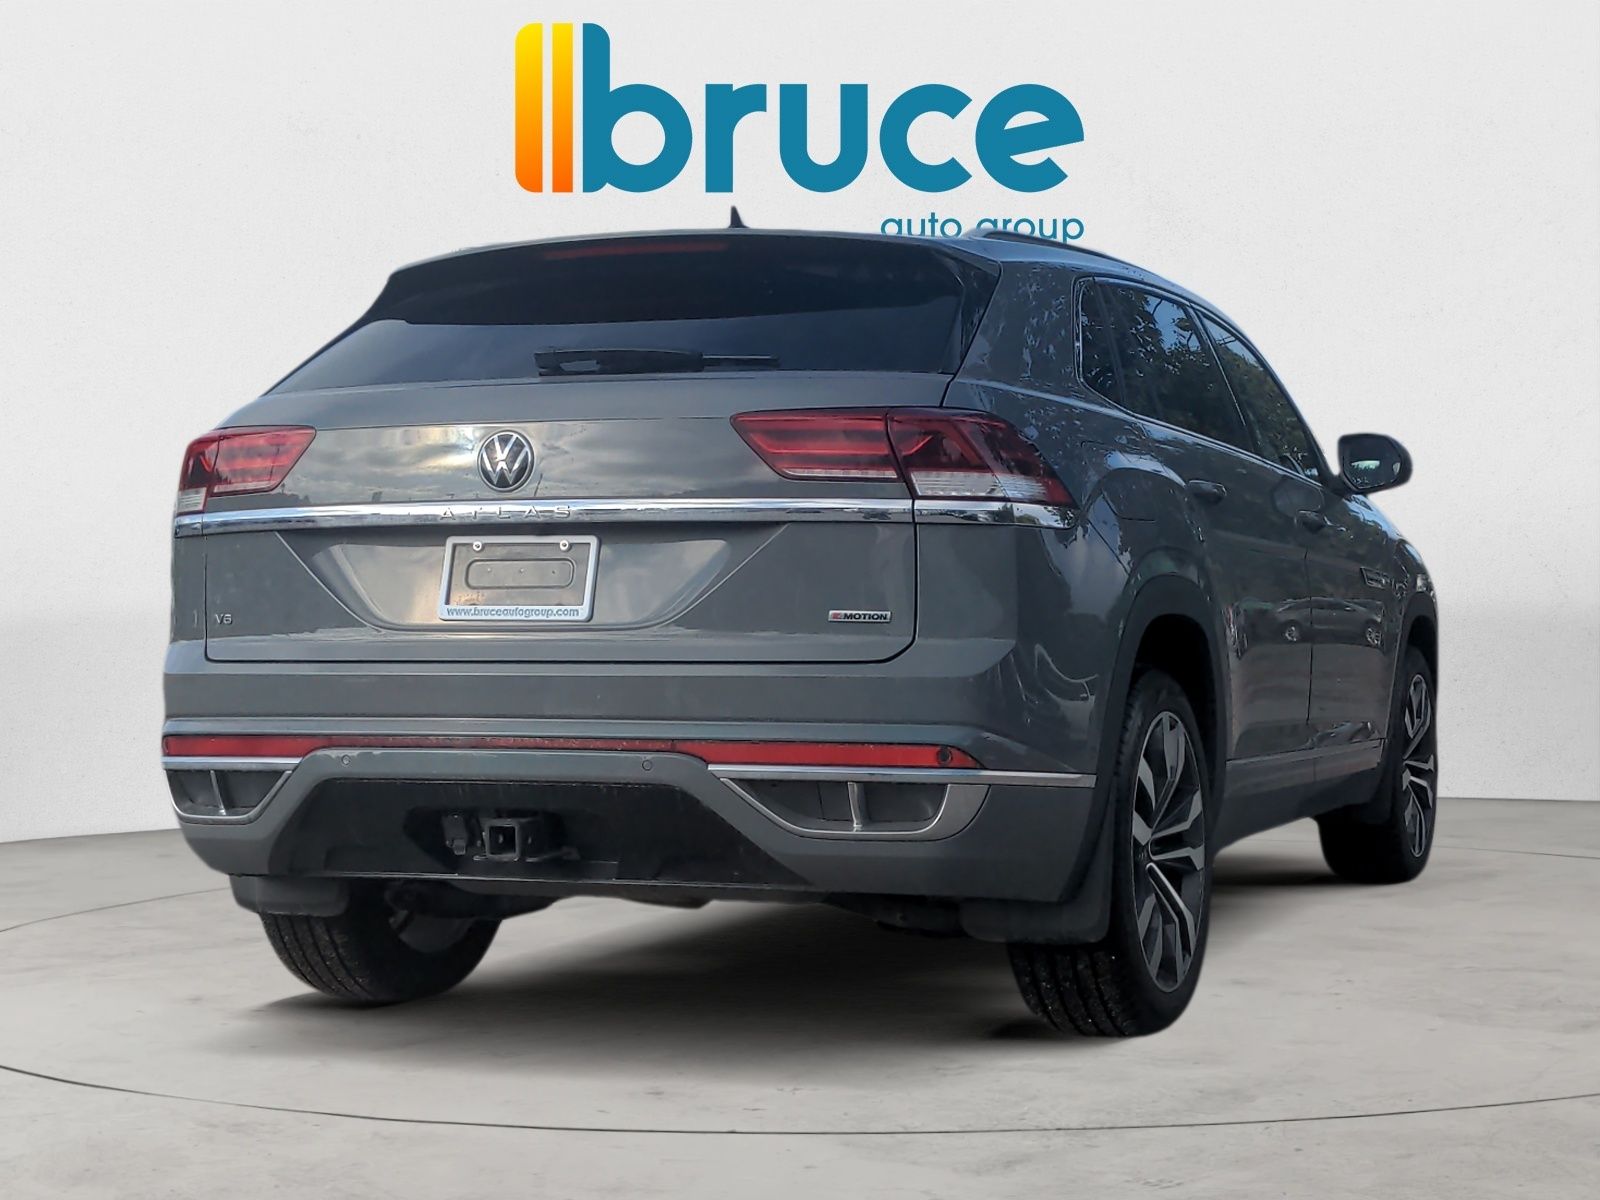 2022 Volkswagen ATLAS CROSS SPORT EXECLINE (RATES STARTING AT 4.99%) 2 YEAR/40K CERTIFIED WARRANTY AVAILABLE, RATES AS LOW AS 4.99%